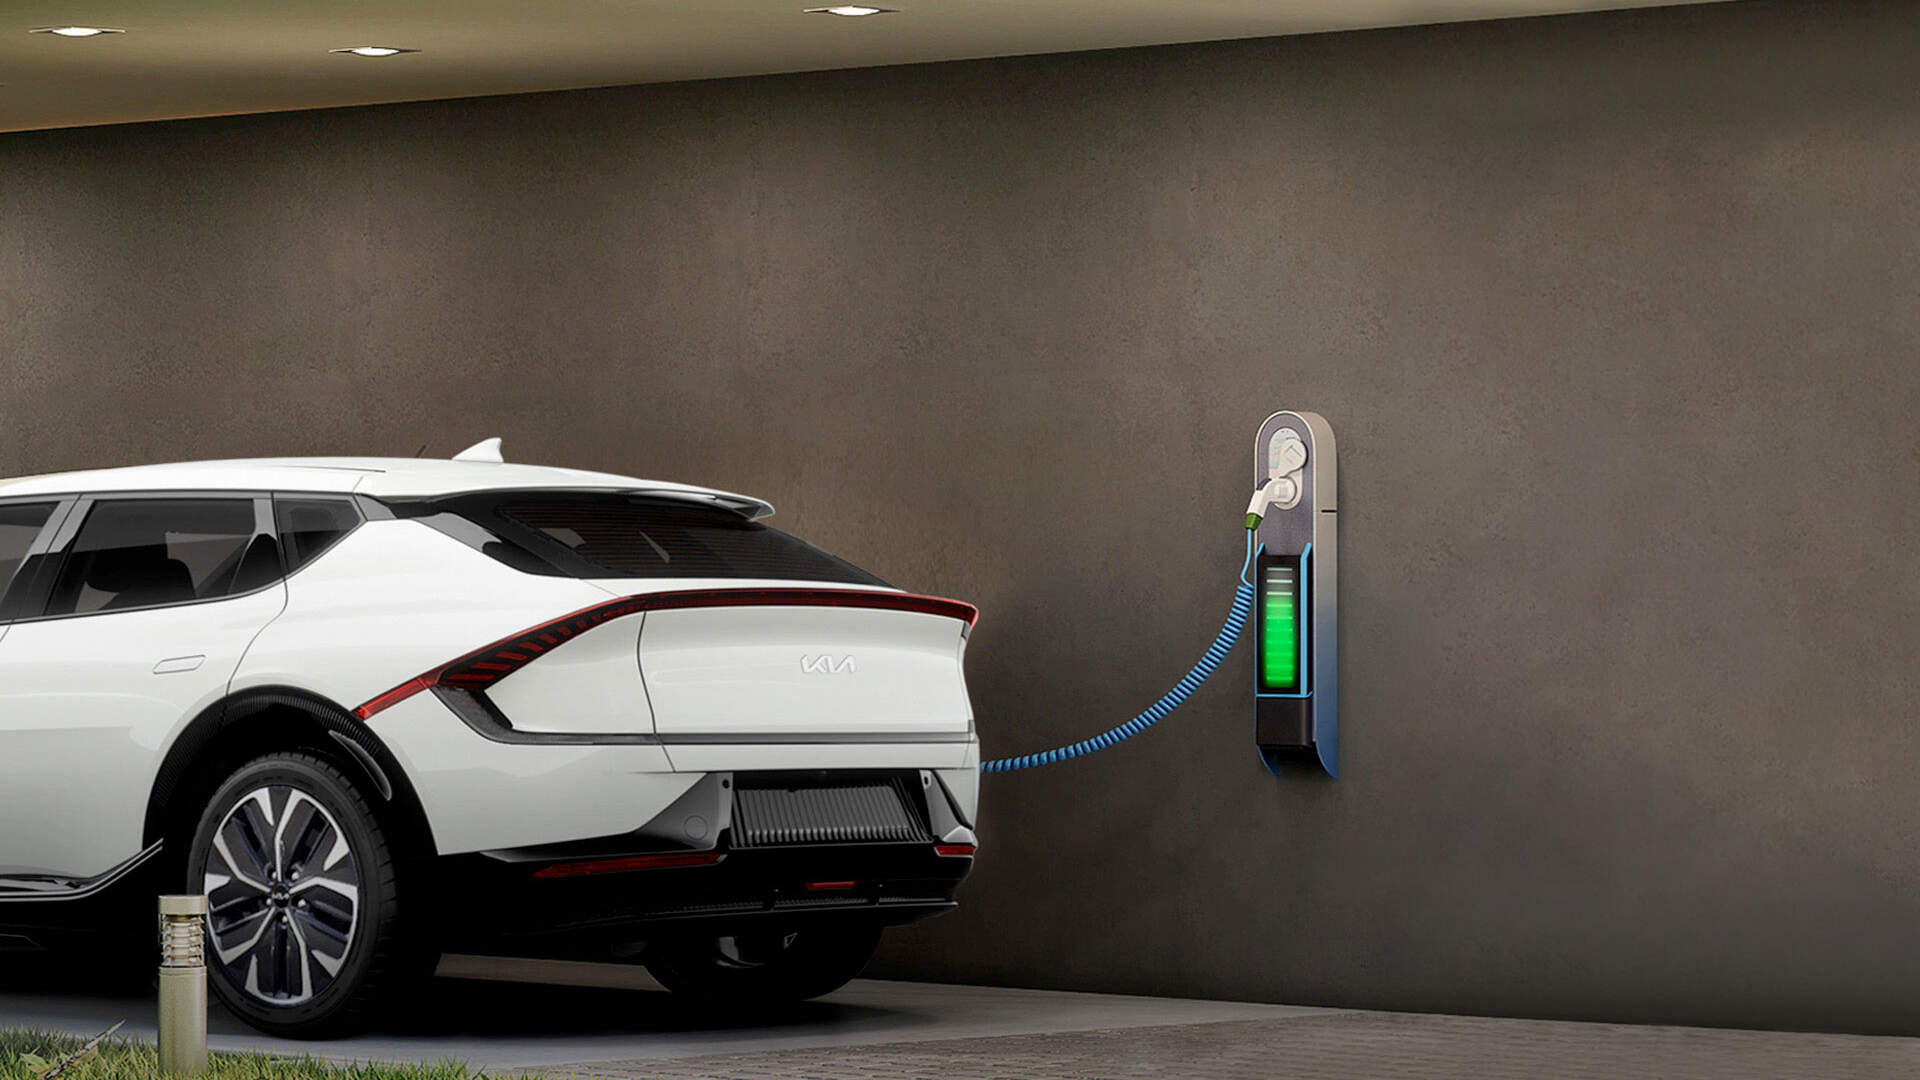 EV6 being charged with a charger installed on a wall